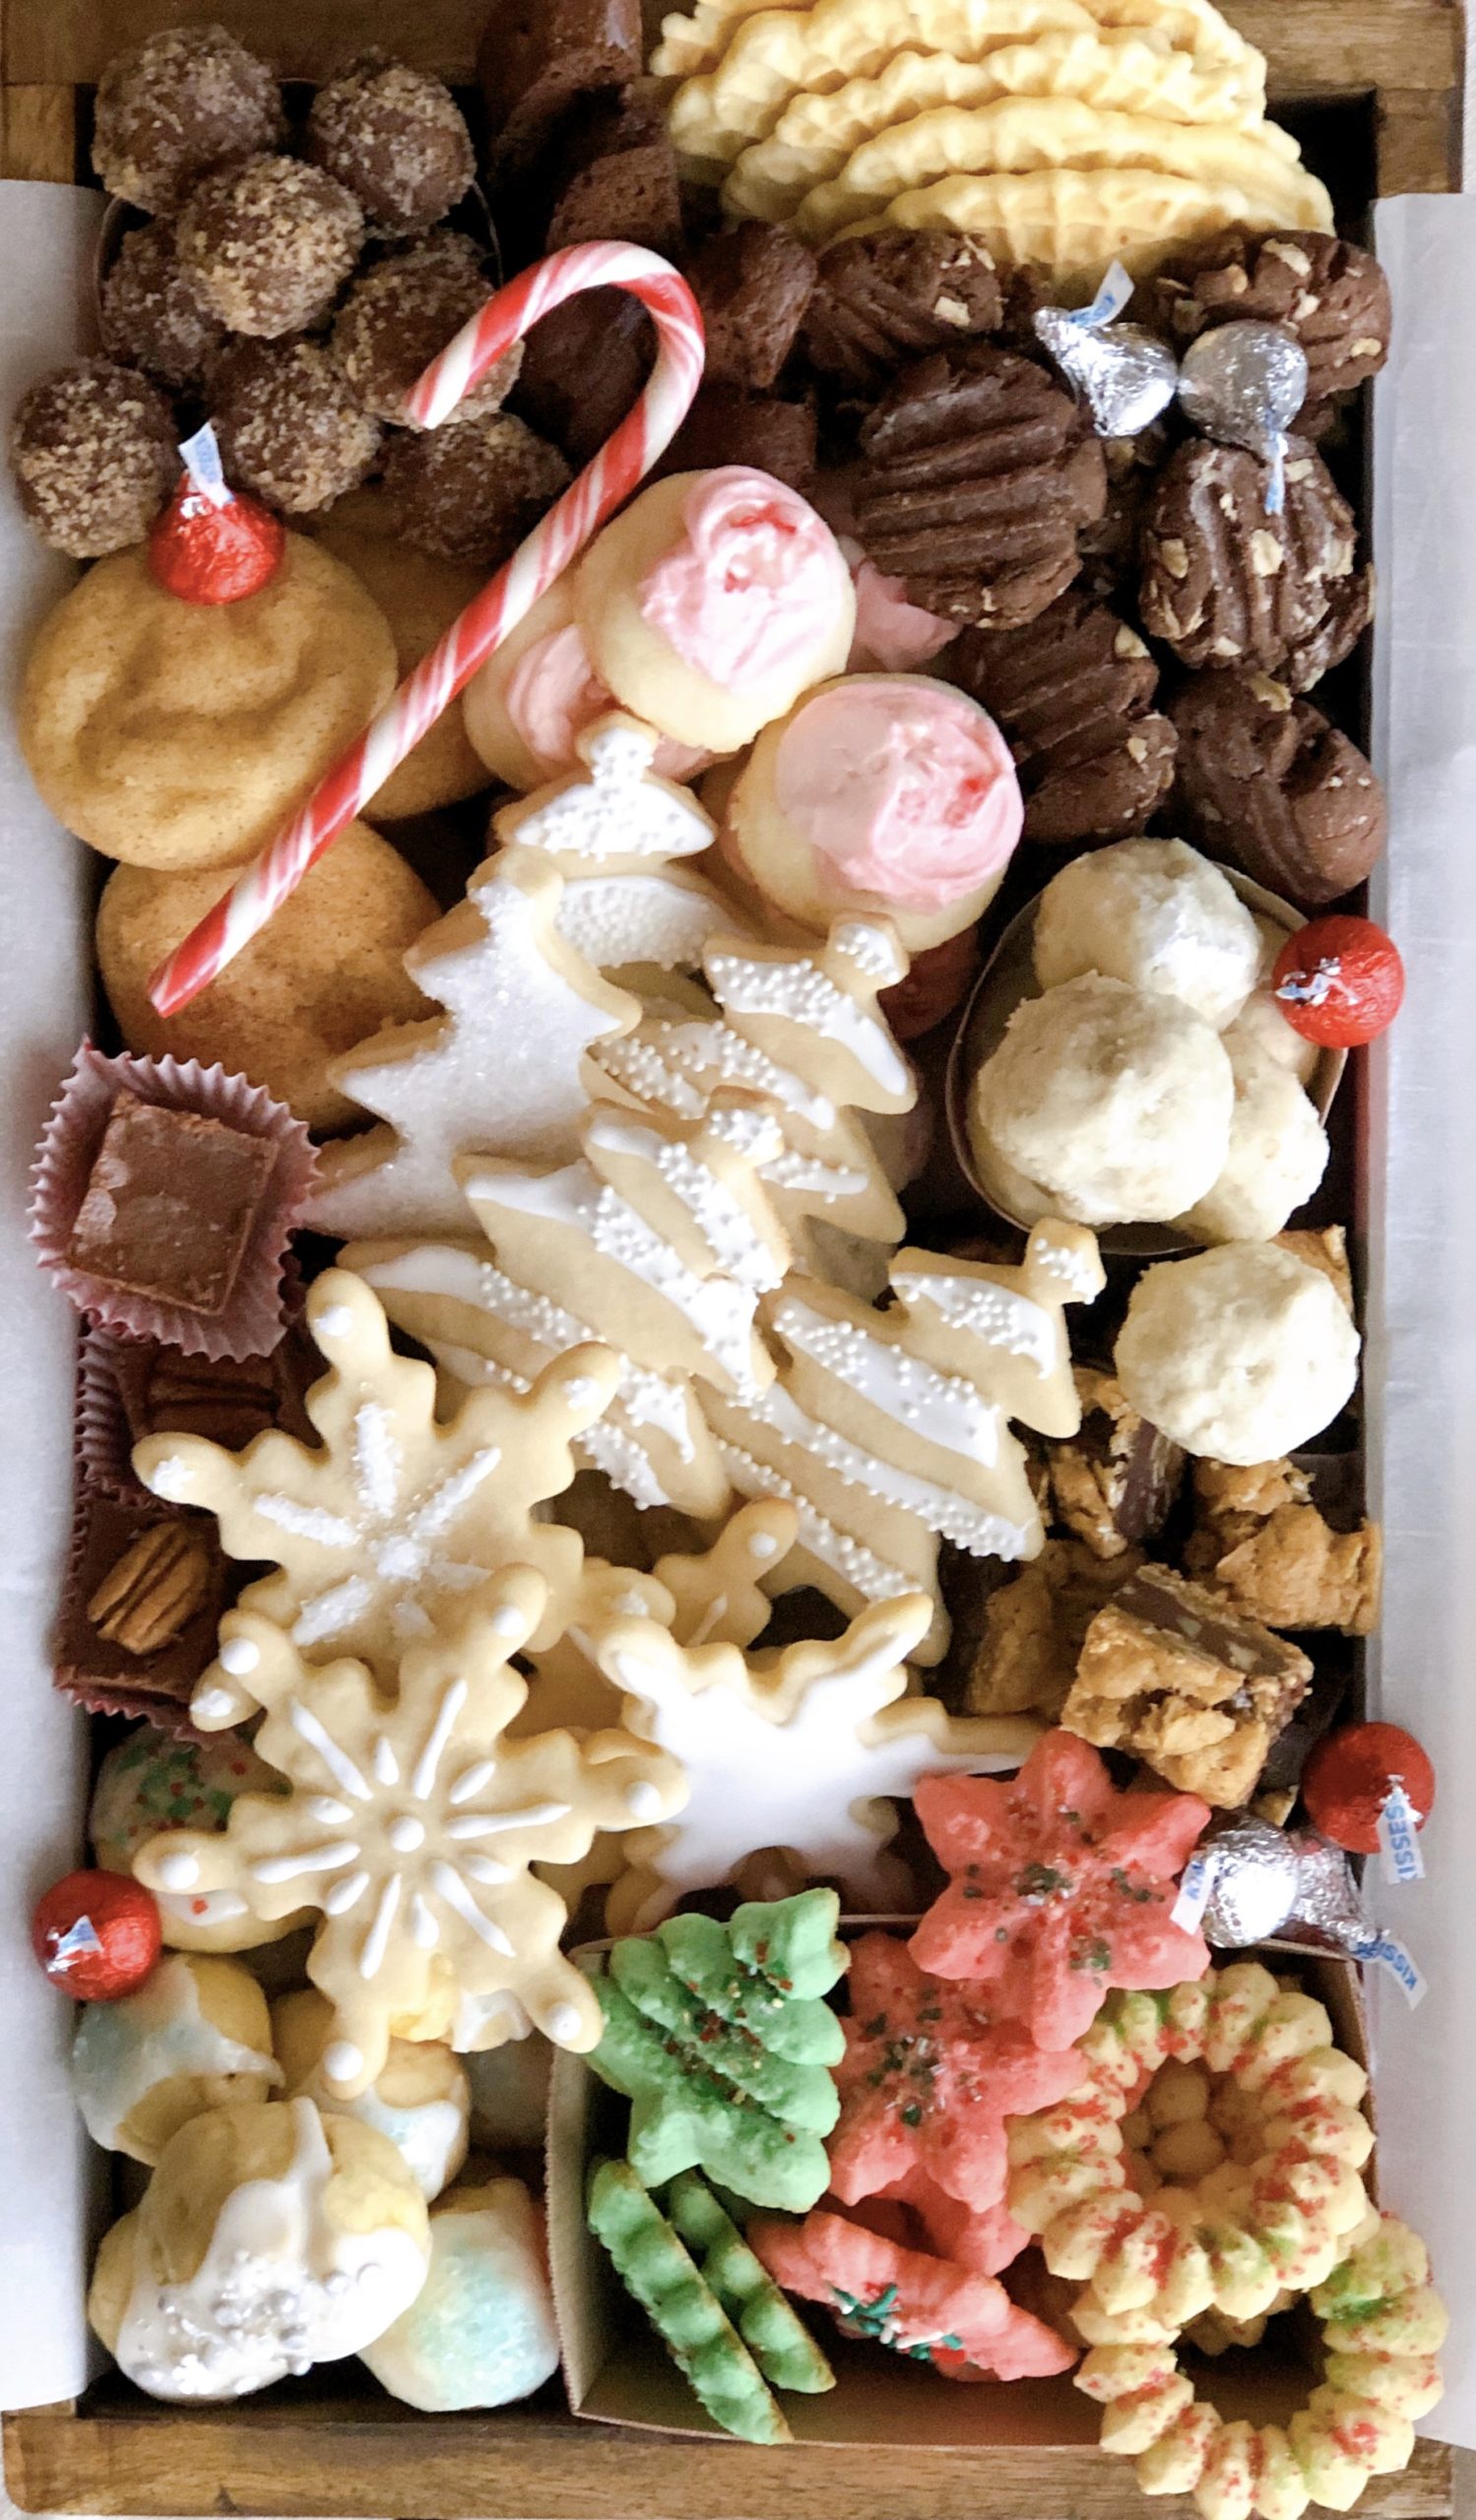 12 Days of Christmas Cookies in a Wooden Tray
